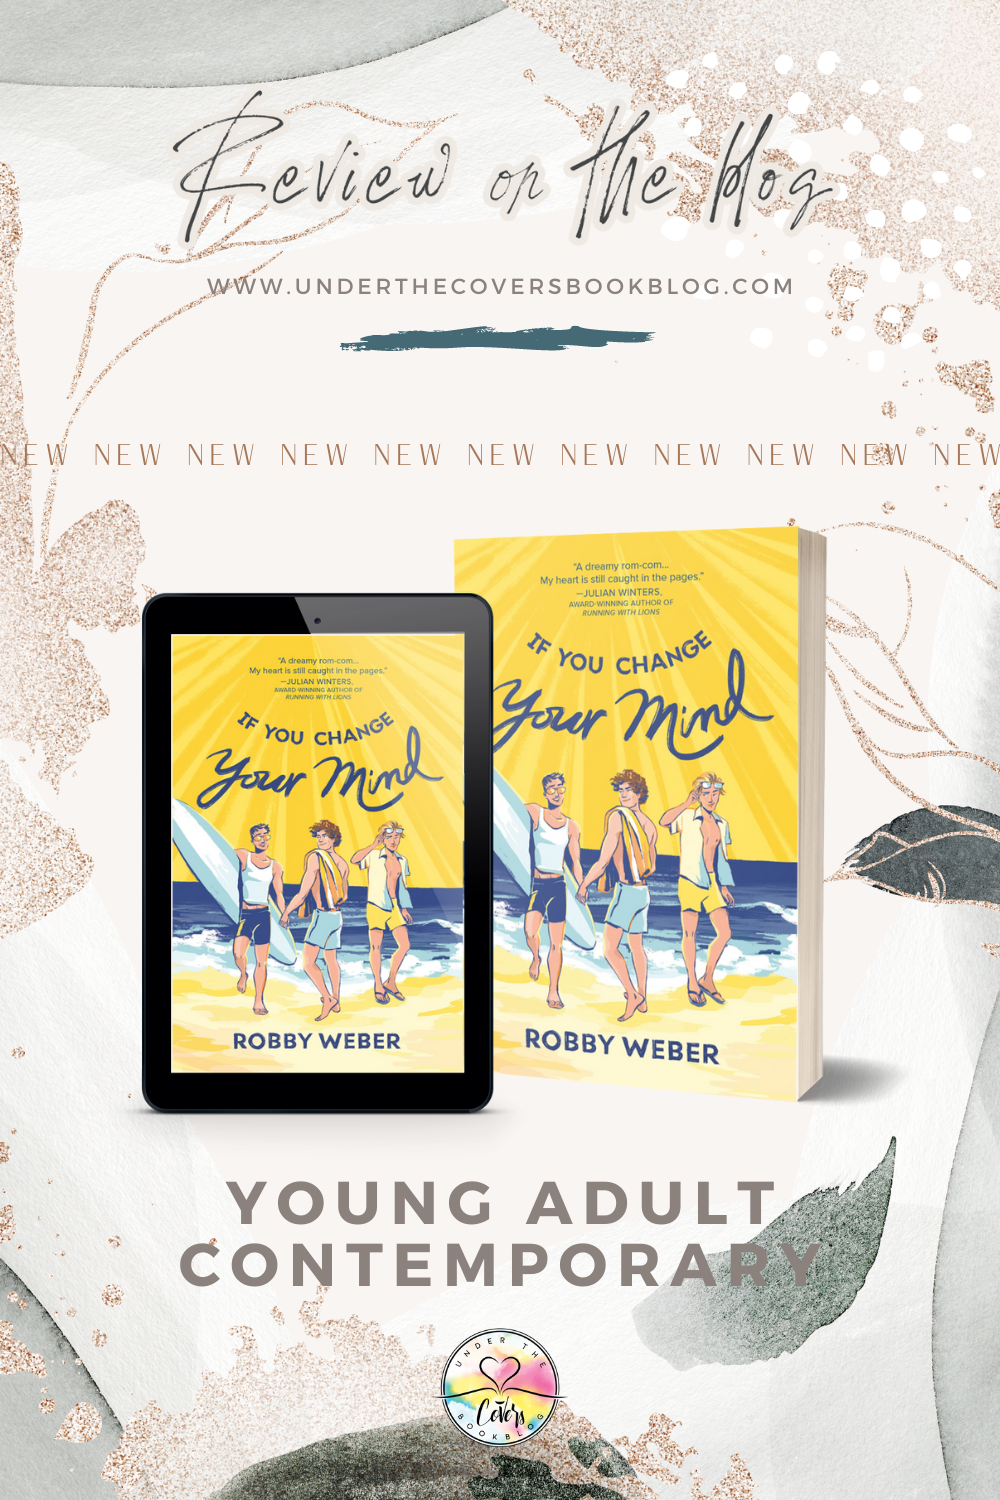 ARC Review: If You Change Your Mind by Robby Weber